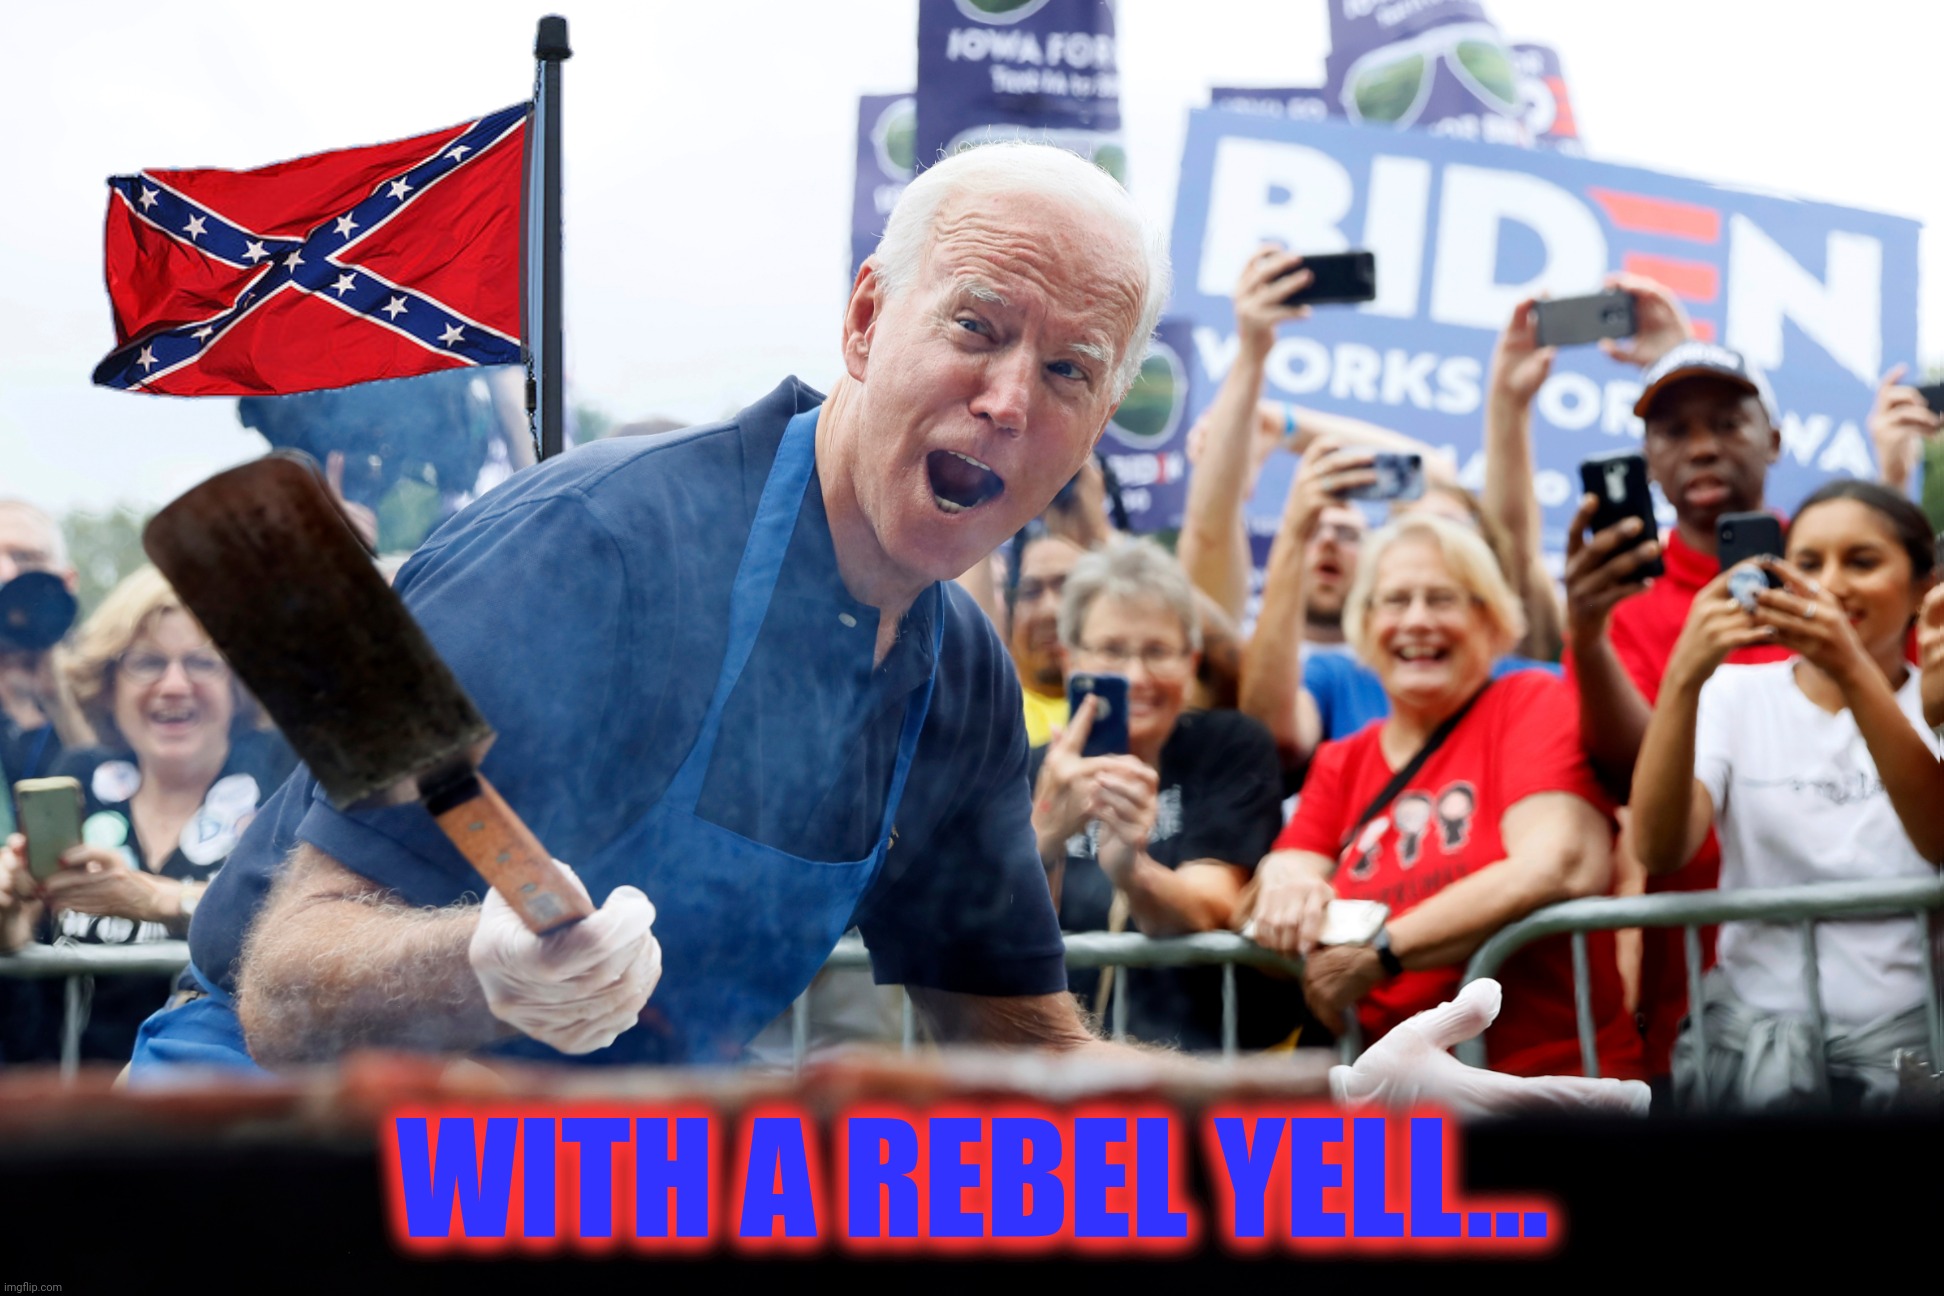 WITH A REBEL YELL... | made w/ Imgflip meme maker